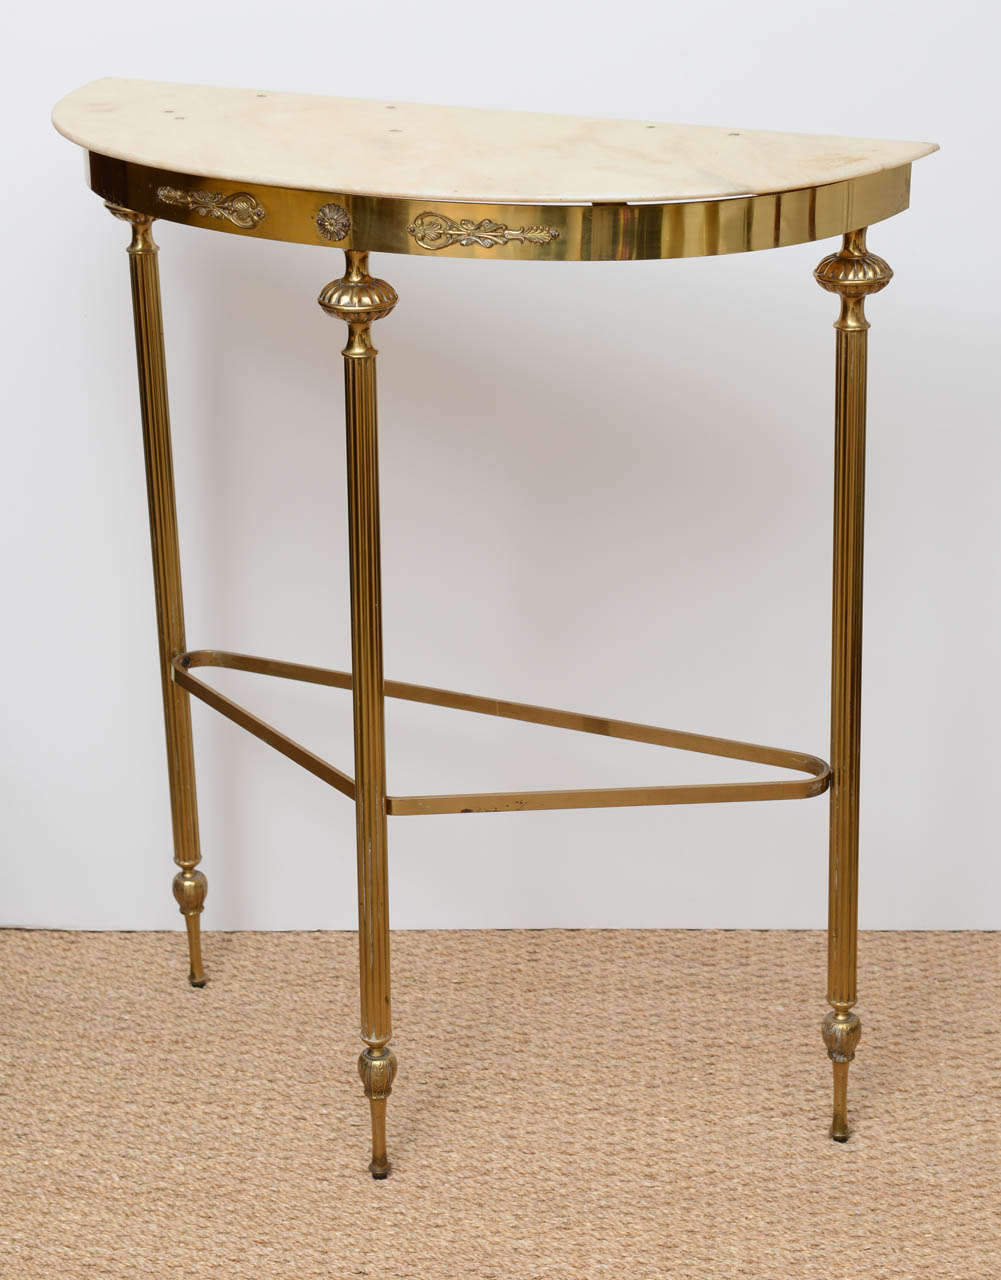 Demi Lune Brass Console from Italy with rare Marble Top.